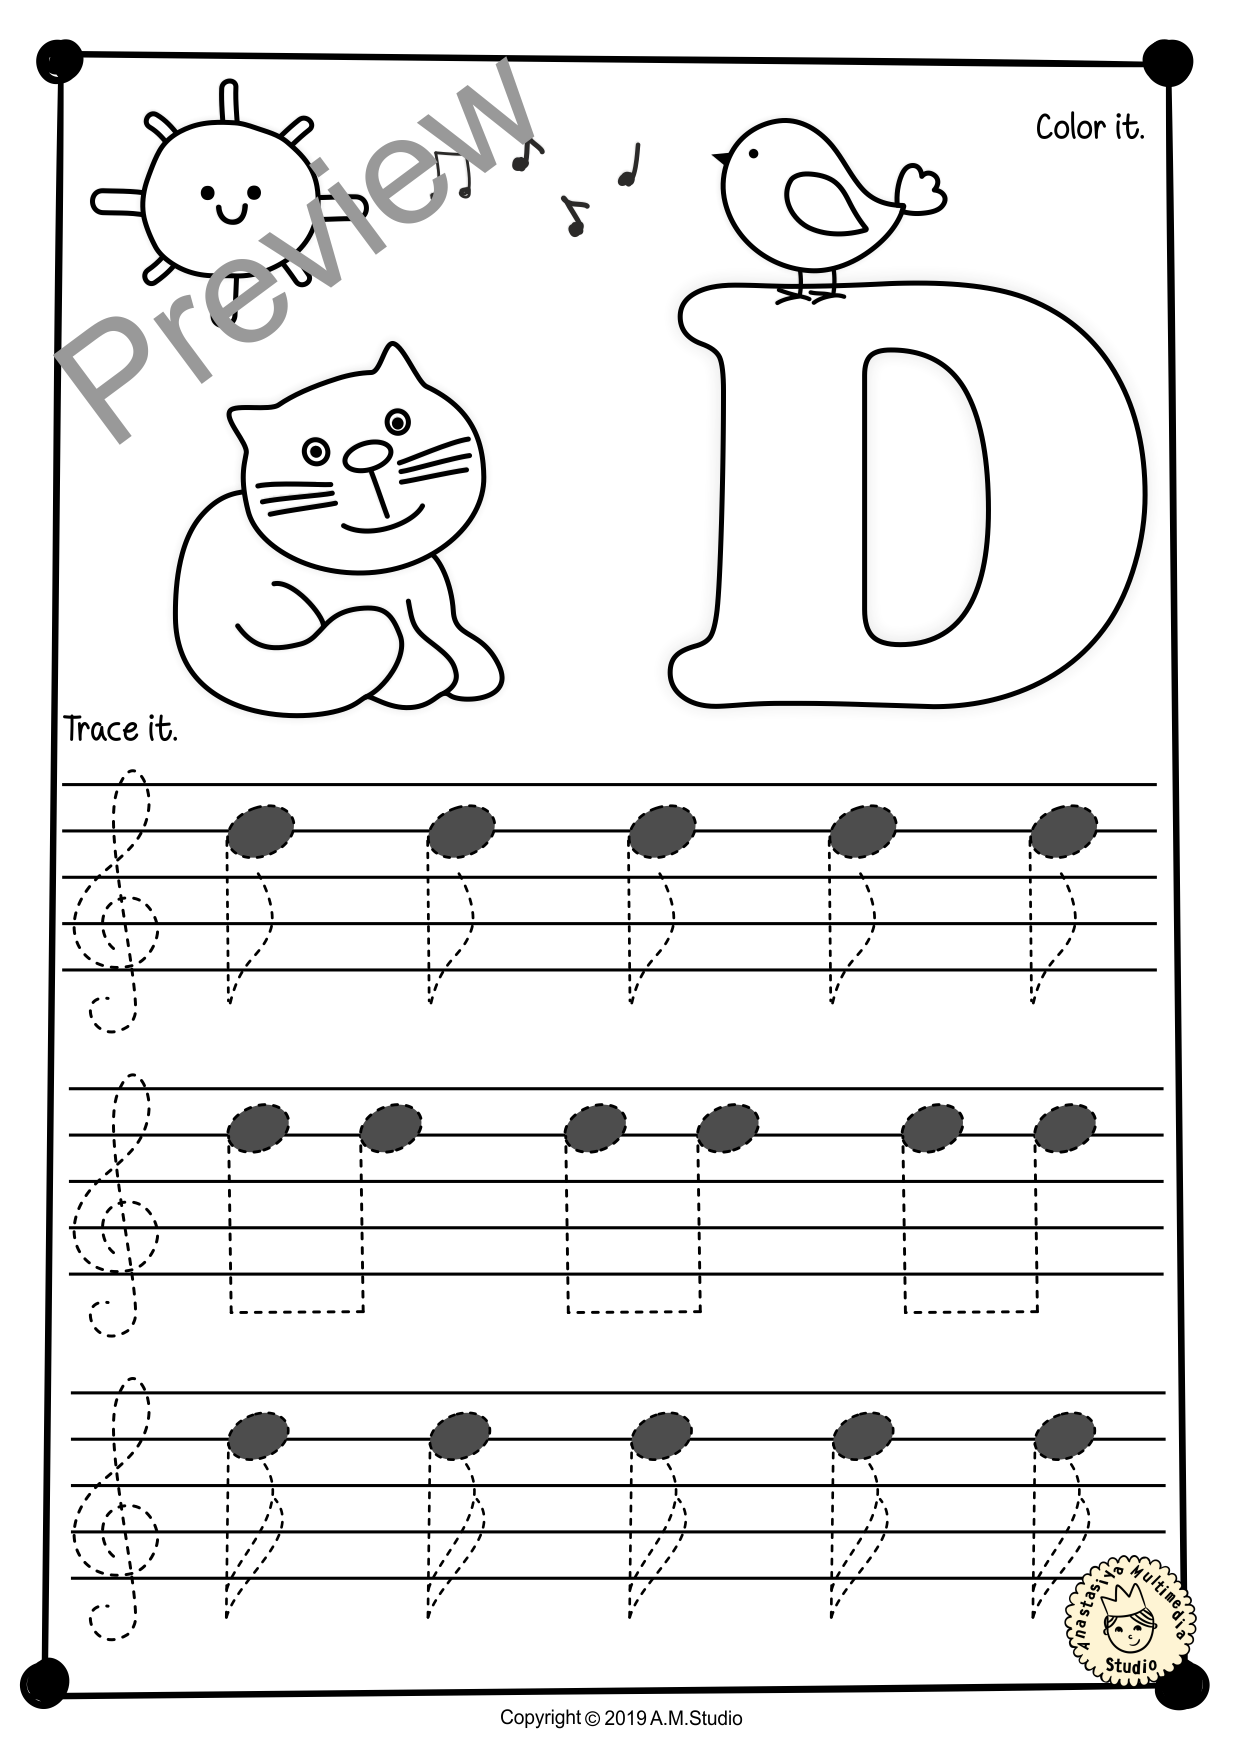 Treble Clef Tracing Music Notes Worksheets for Spring (img # 4)